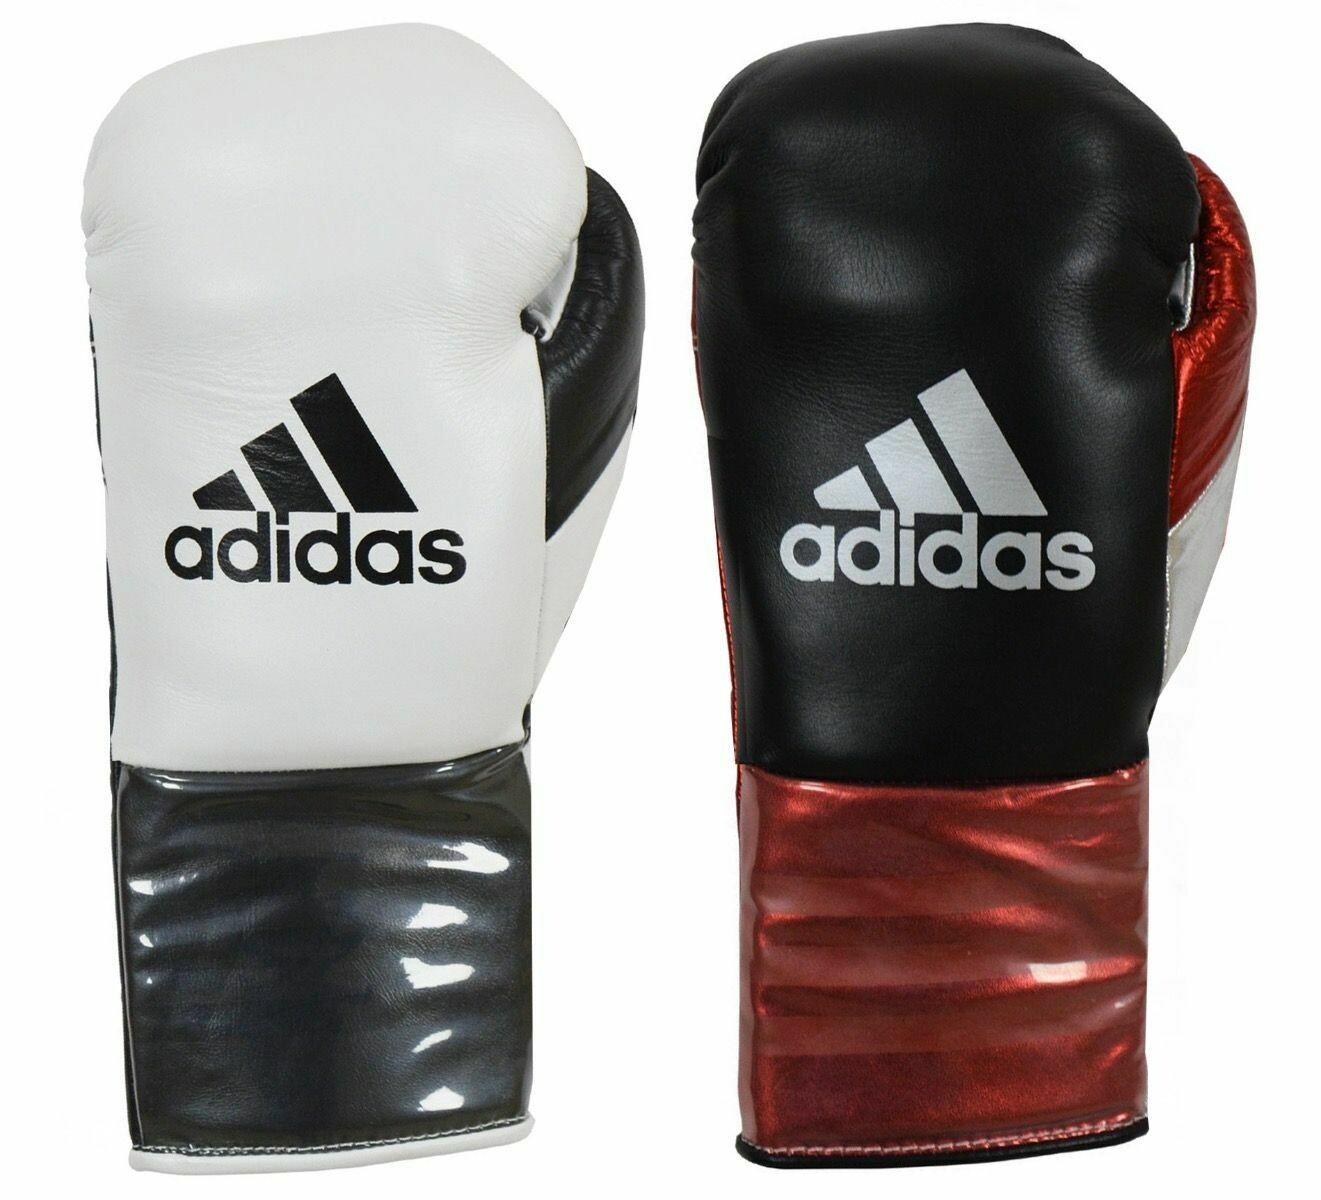 ADIDAS ADISTAR BBBC APPROVED PRO BOXING GLOVES